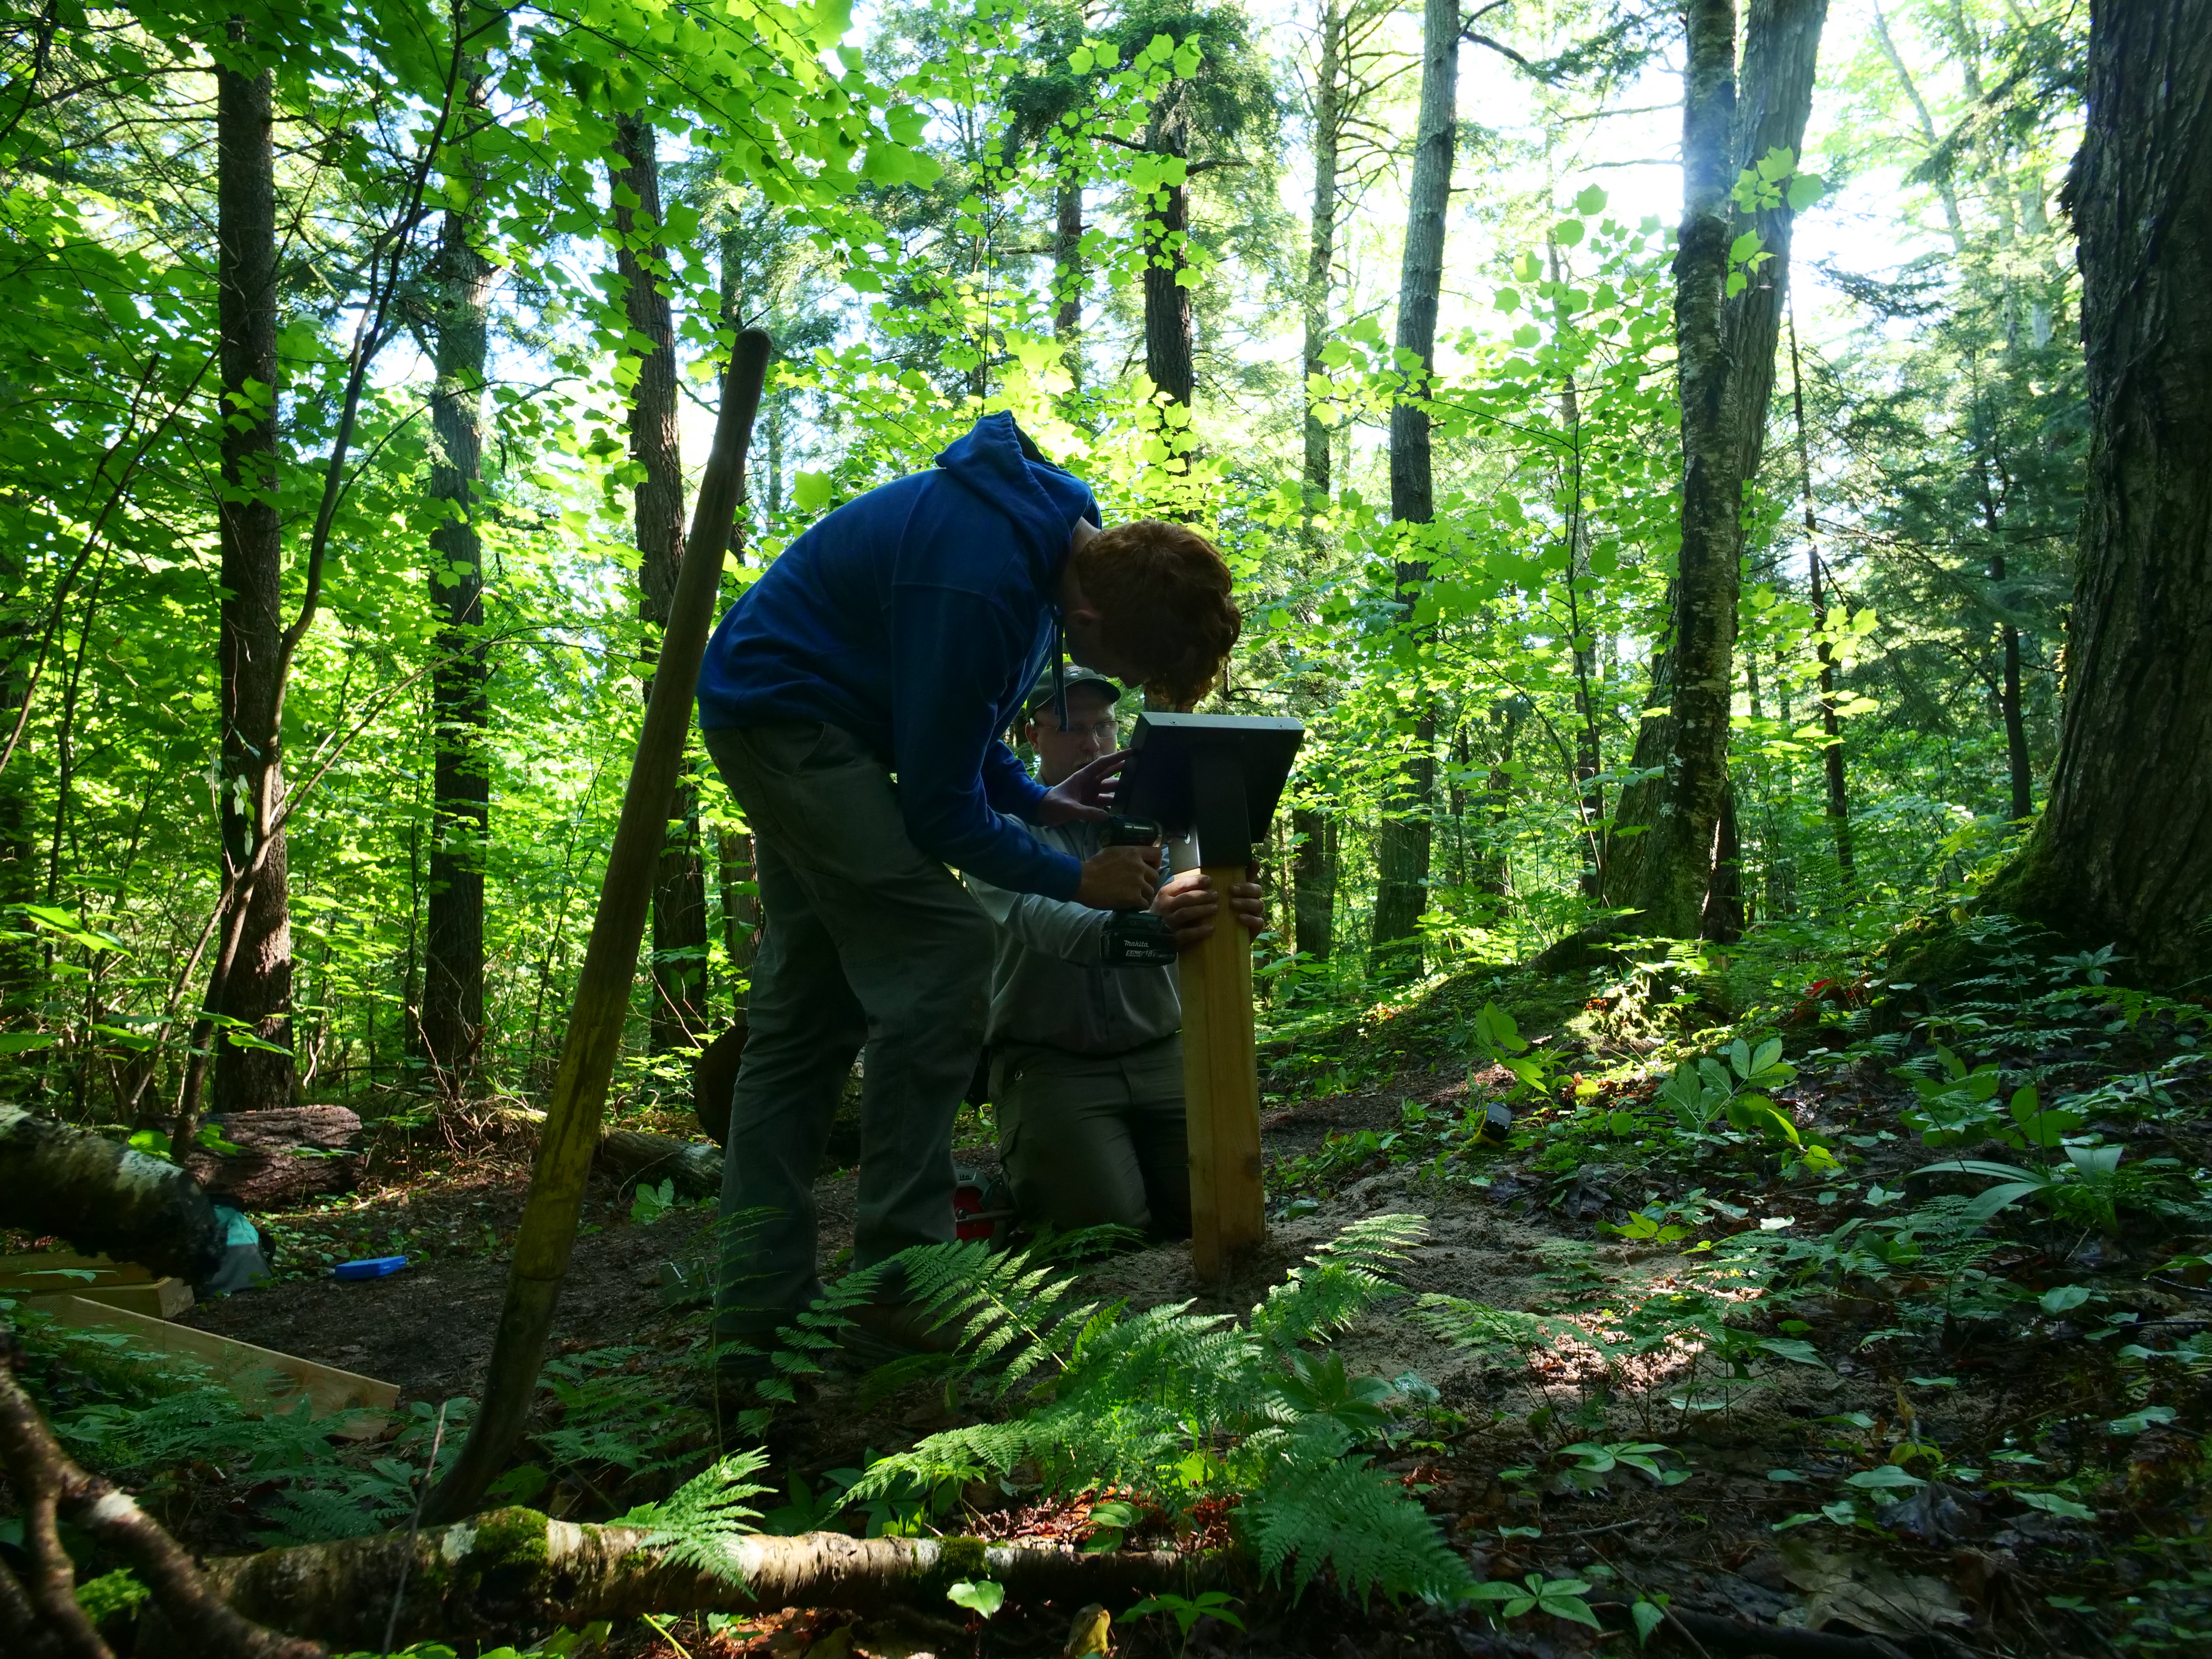 A person in a blue hoodie installs a sign in a densely forested area.